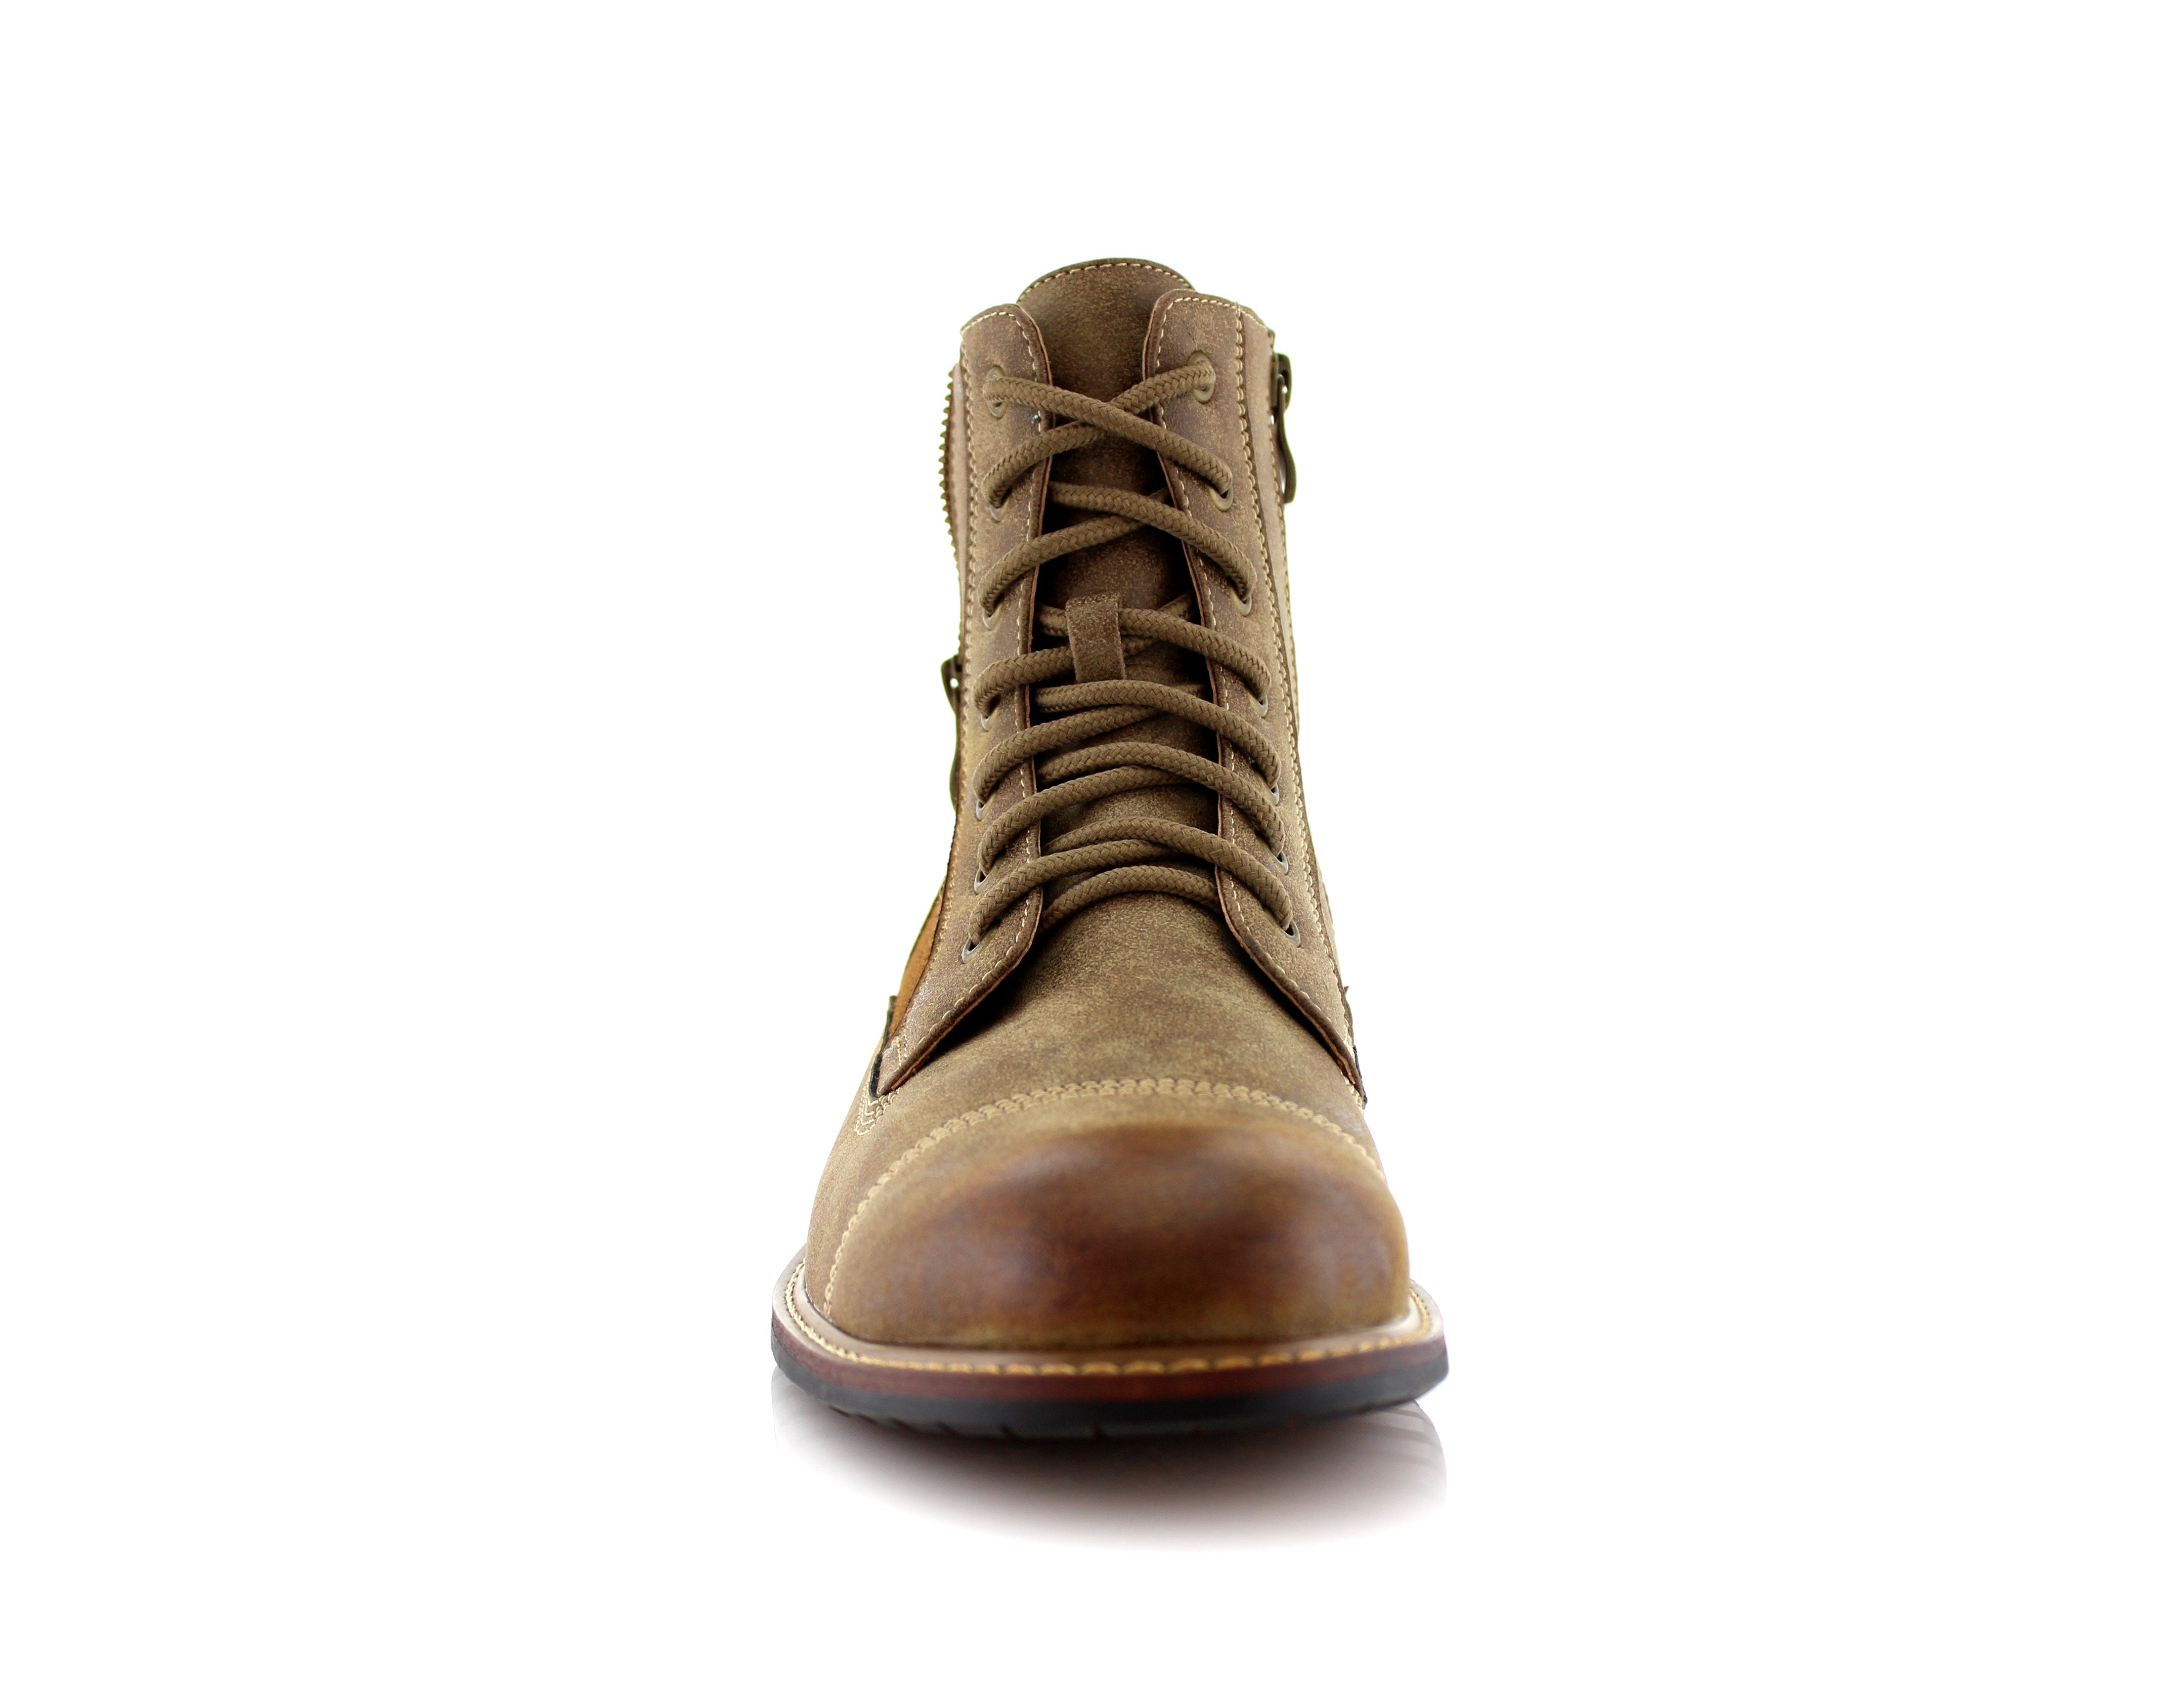 Duo-Textured Zipper Closure Combat Boots | Andy by Ferro Aldo | Conal Footwear | Front Angle View